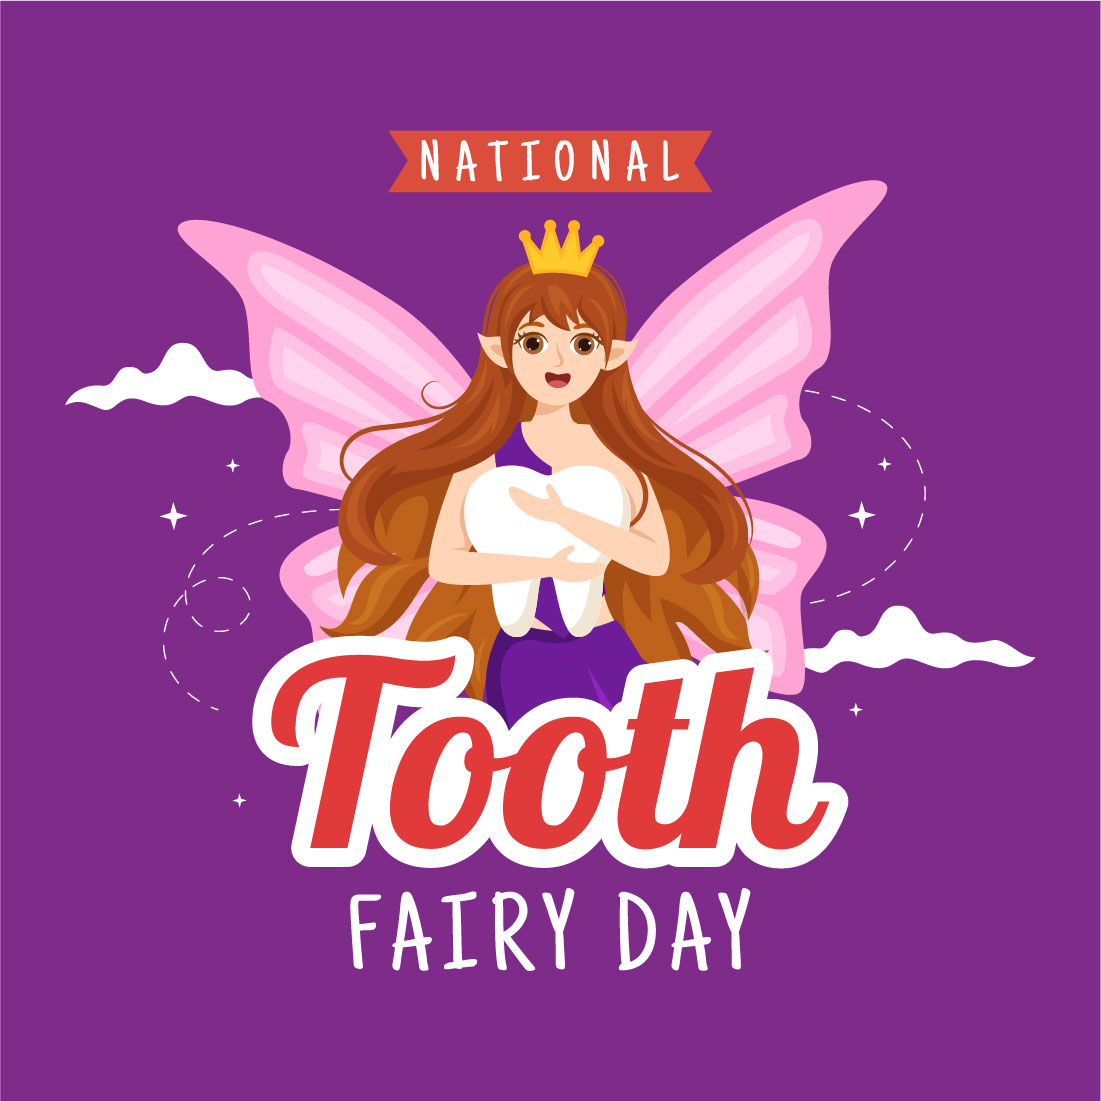 Tooth Fairy Day Graphics Design cover image.